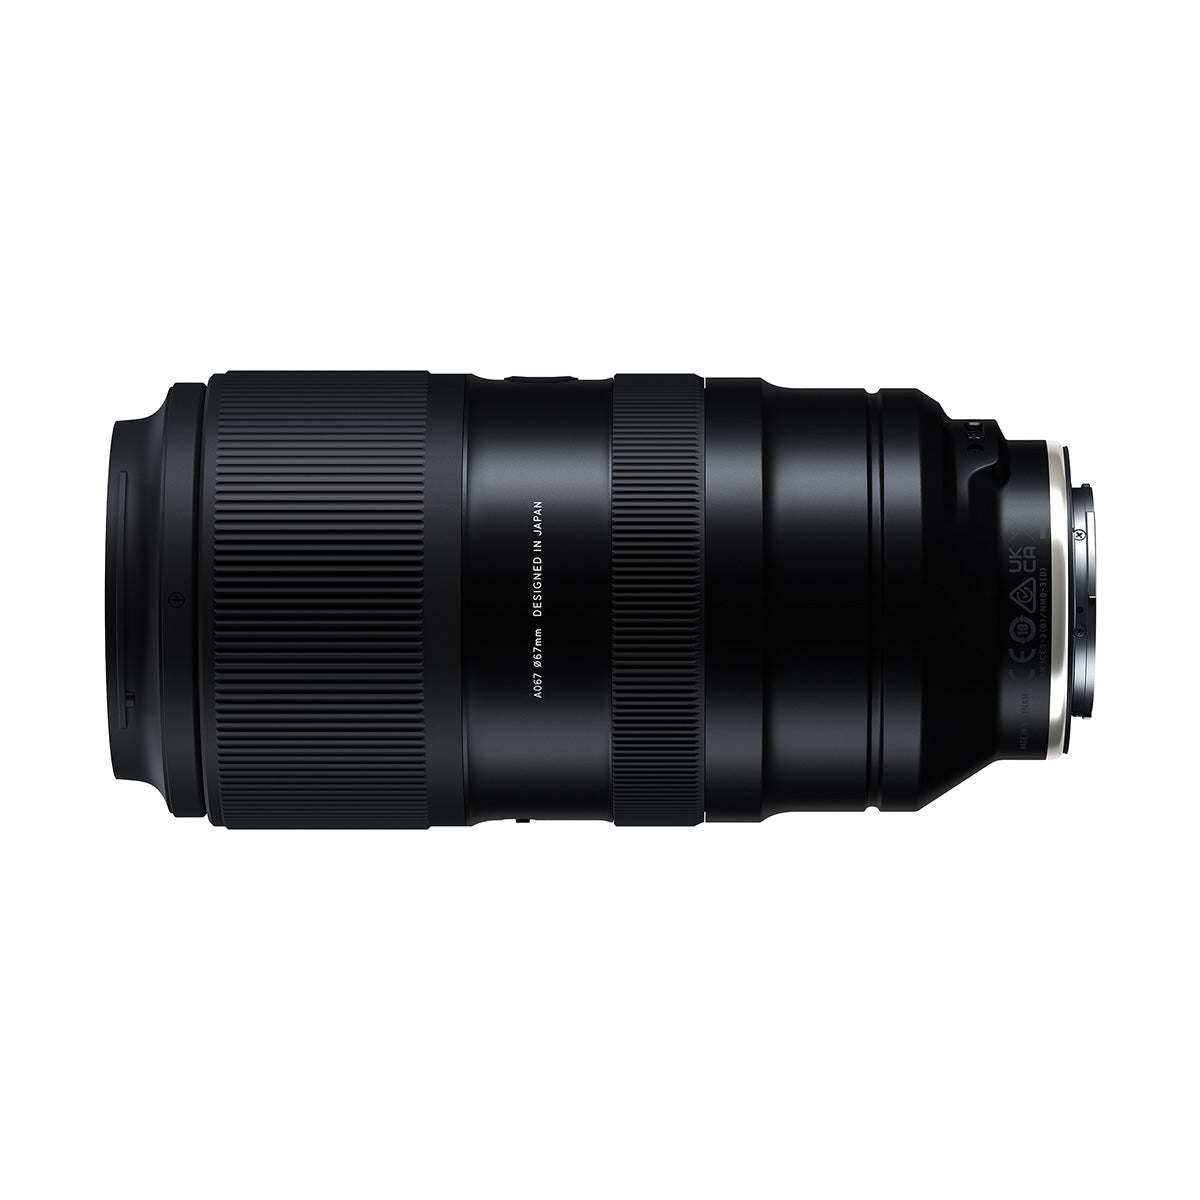 Tamron 50-400mm F/4.5-6.3 Di III VC VXD Lens for Sony FE